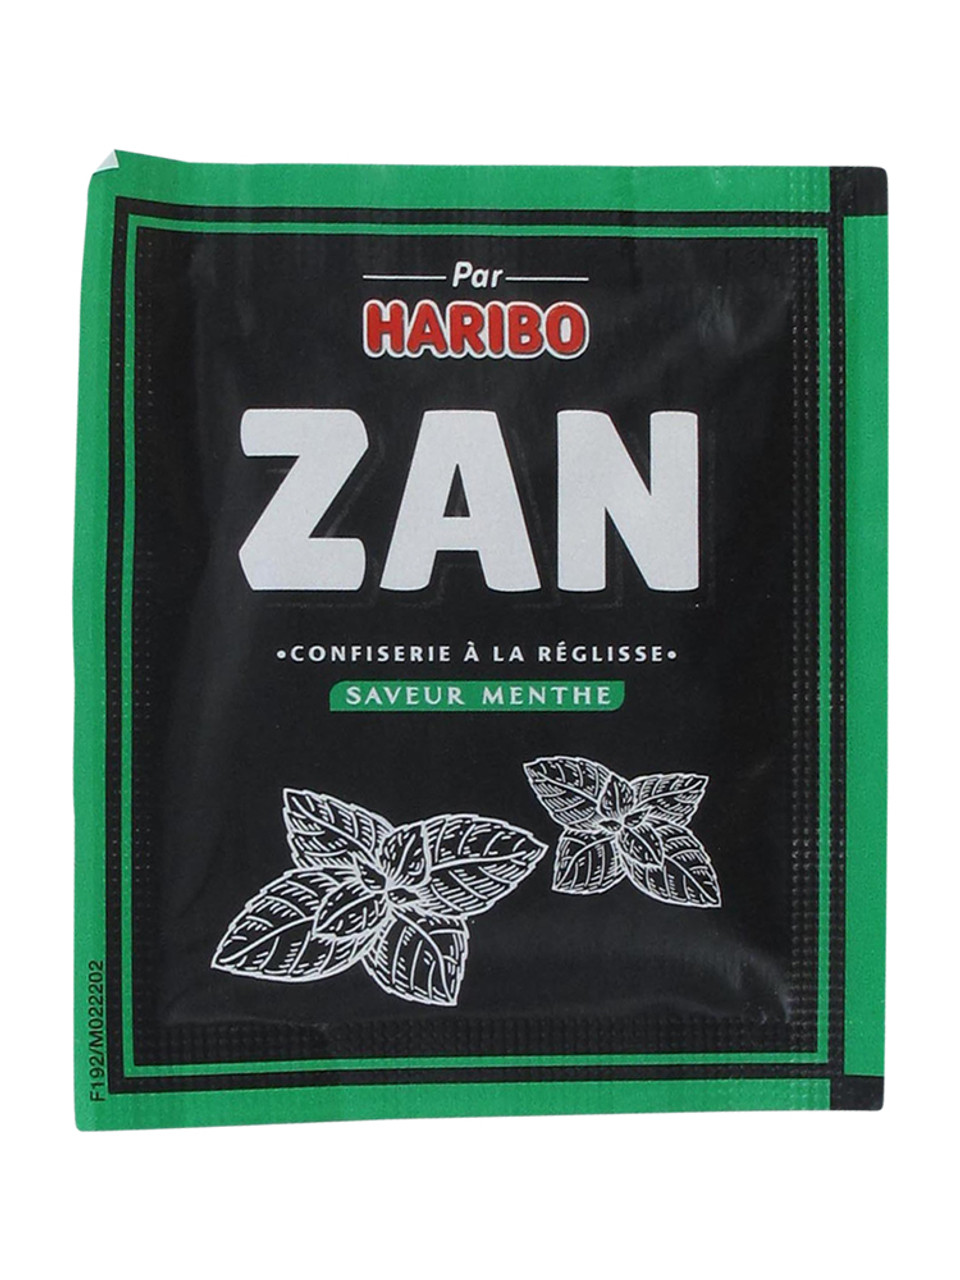 The Old Zan Liquorice Tablets At The Haribo Museum In Uzes In The French  Department Of Gard Stock Photo, Picture and Royalty Free Image. Image  132891006.